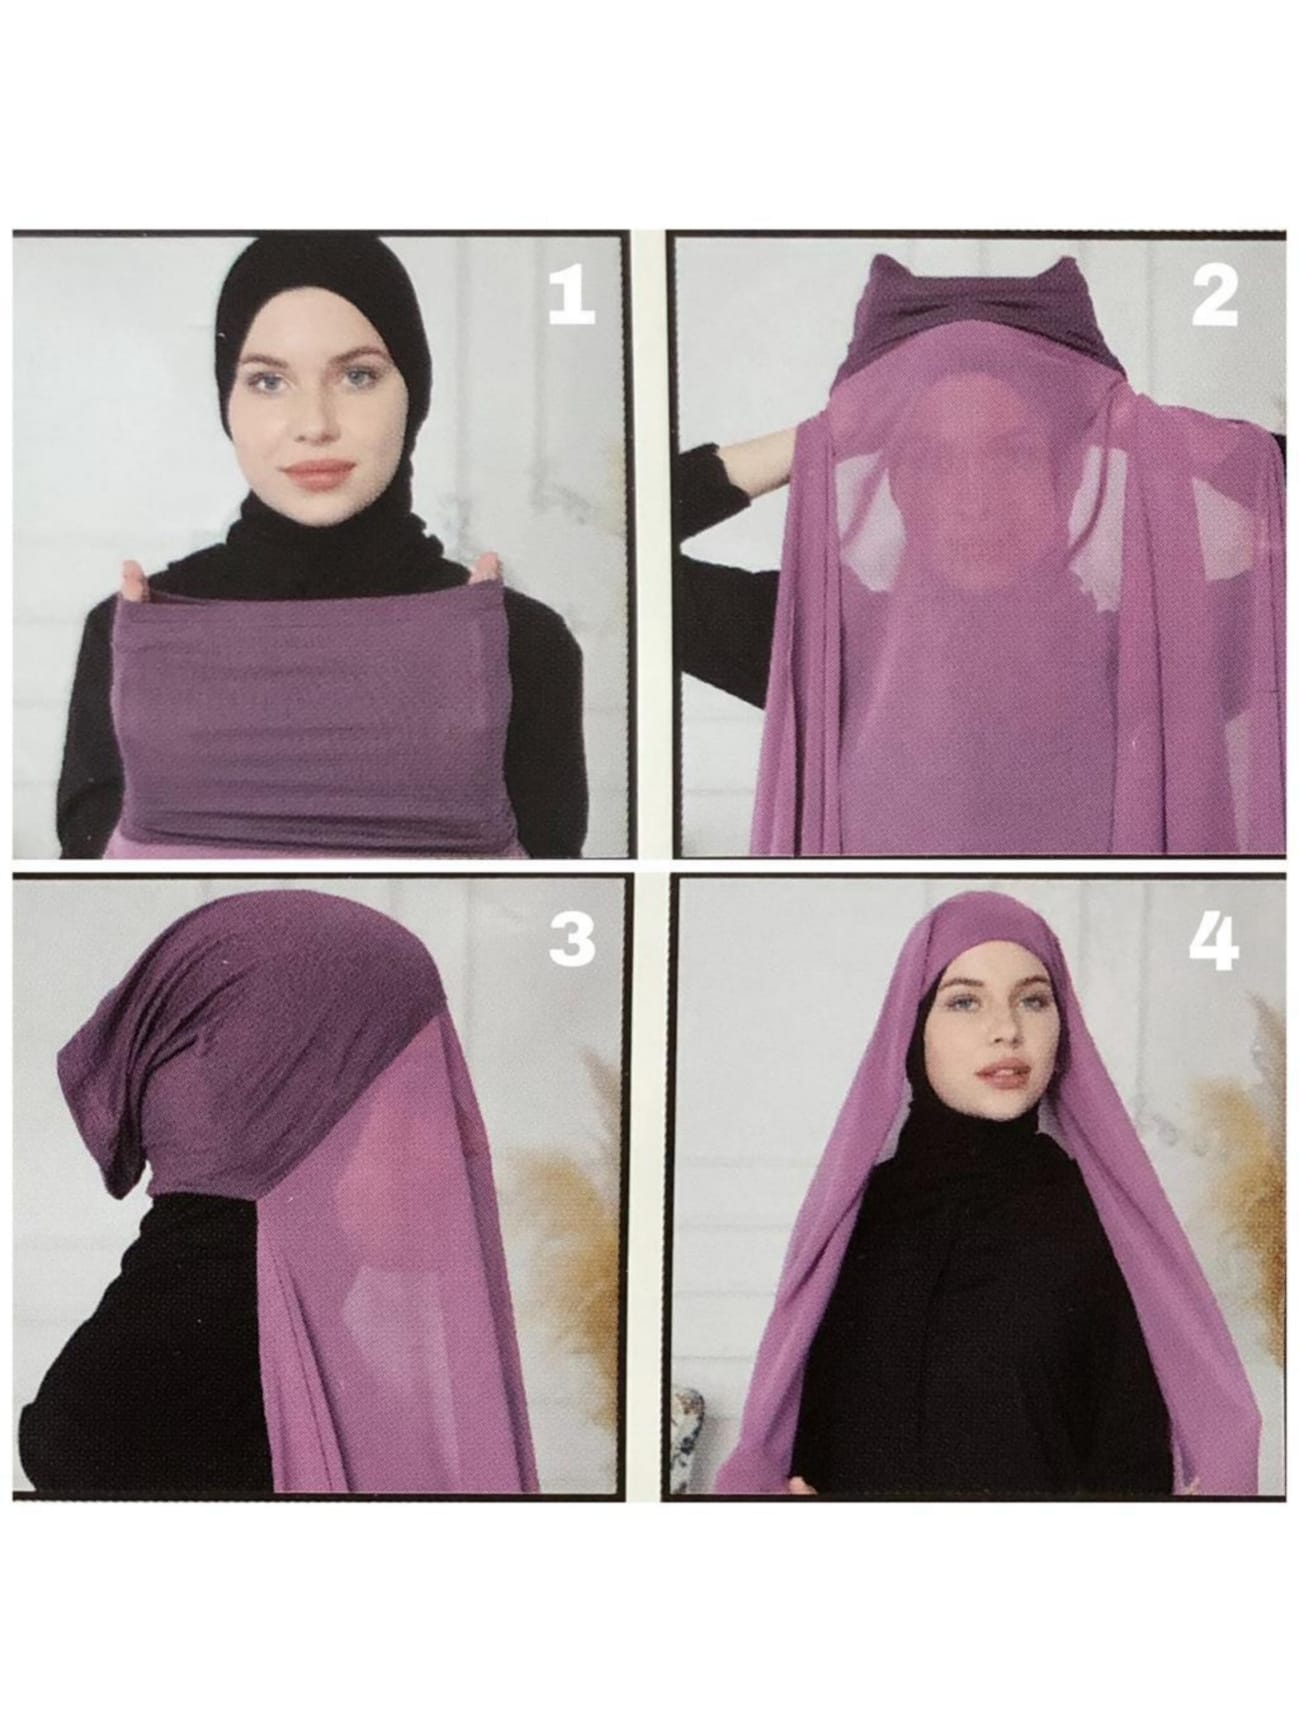 Hijab - Instant Chiffon With Cap - Nude Beige